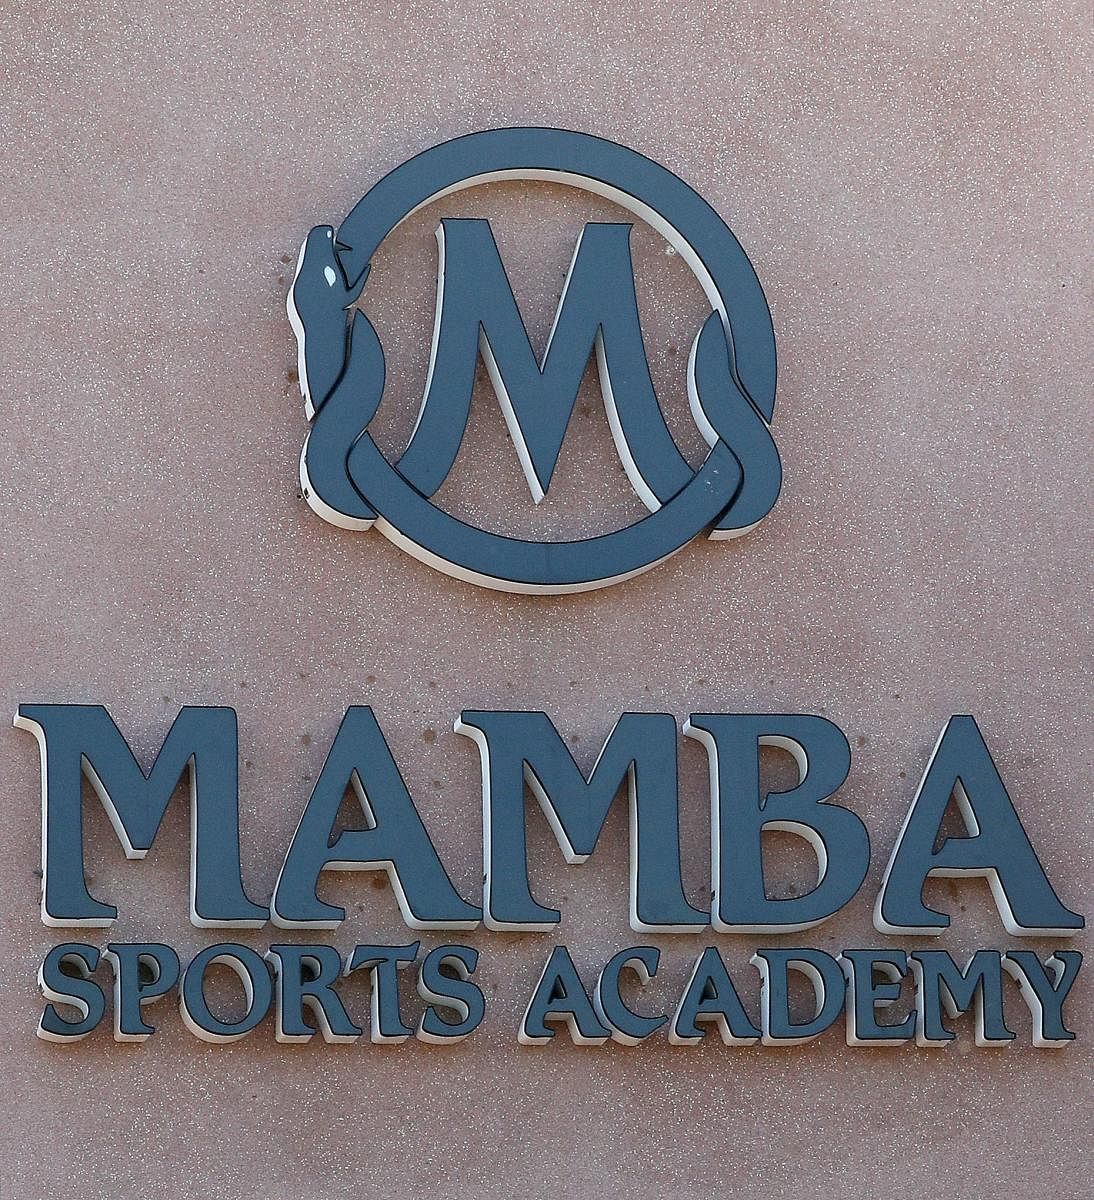 The Sports Academy announced on their website on Tuesday that they are removing "Mamba" from their name and launching a new website and logo rebranding. The Mamba Sports Academy was launched in 2018 as a joint athletic training business venture with Kobe Bryant and Sports Academy CEO Chad Faulkner. The name change is out of respect for Bryant, who along with his 13-year-old daughter, Gianna, were among nine people who died in a helicopter crash on their way to the facility on January 26. (AFP Photo)